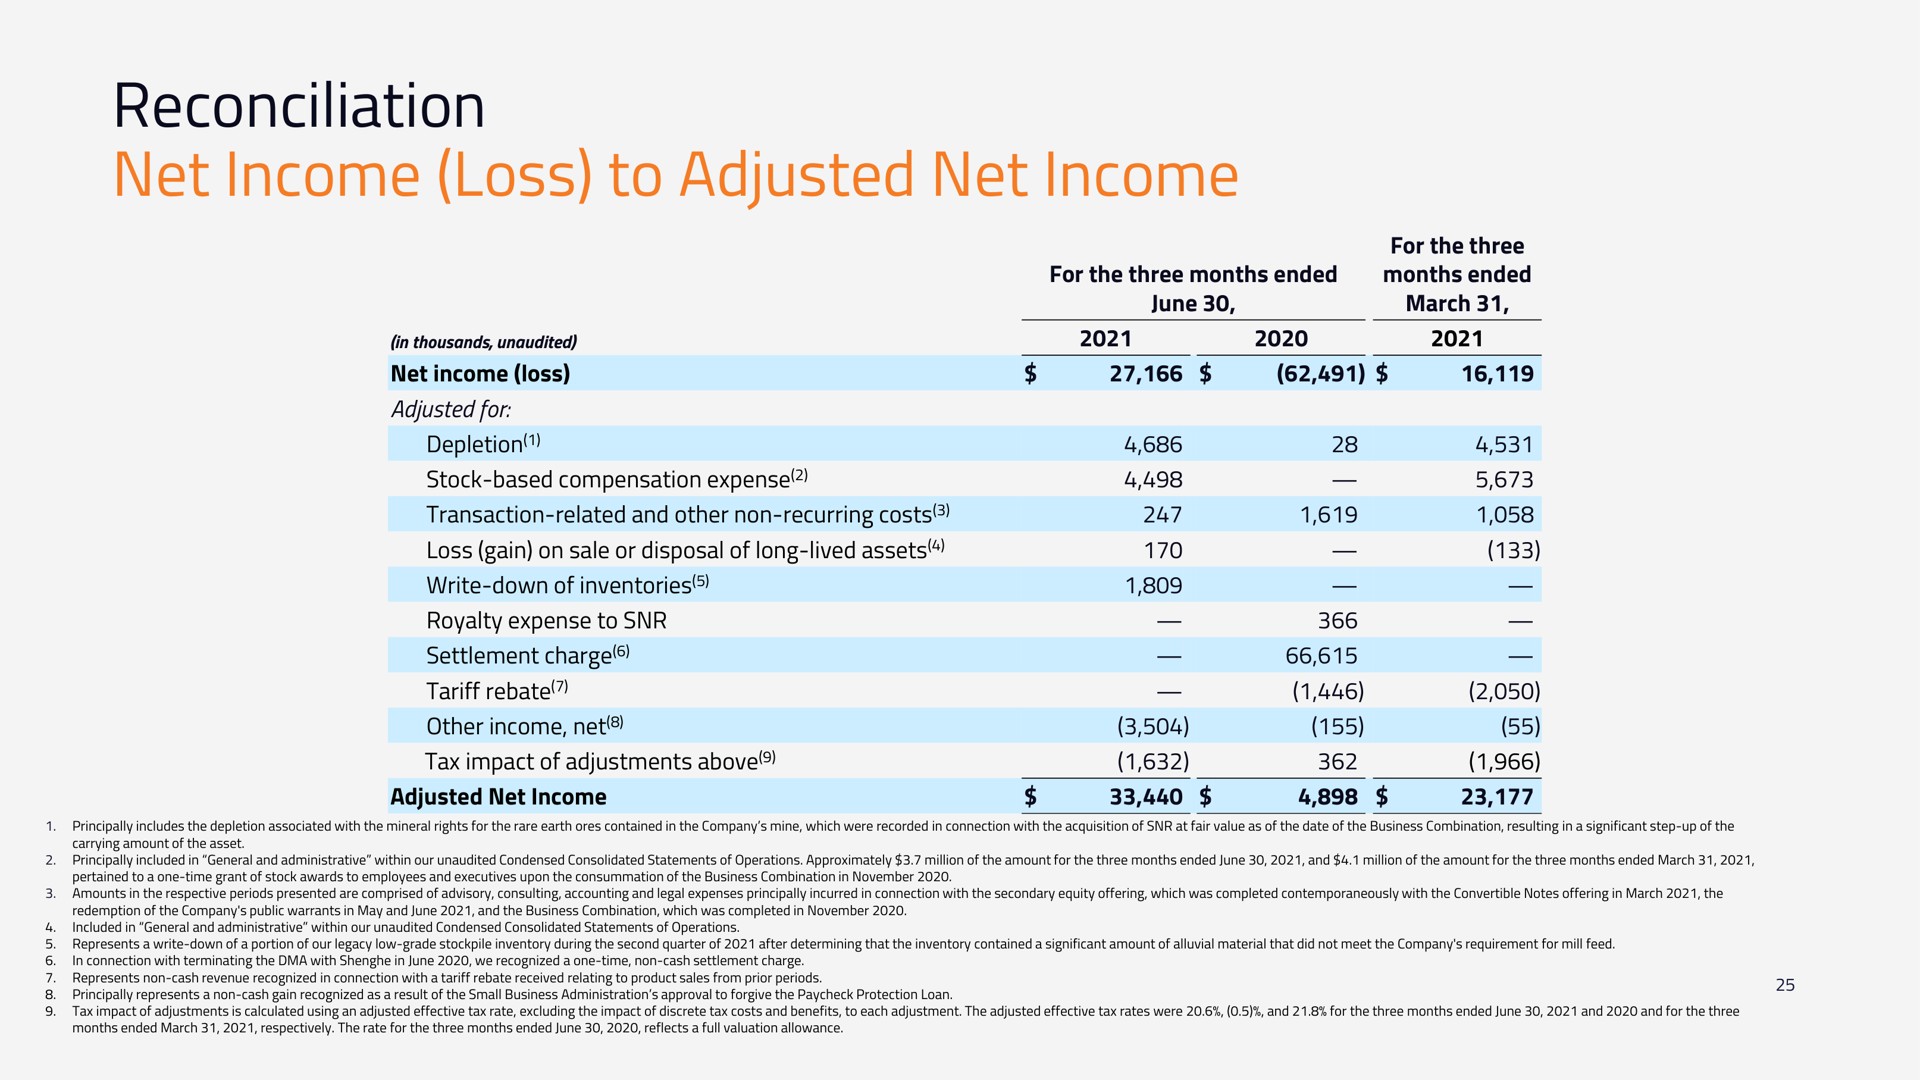 reconciliation net income loss to adjusted net income | MP Materials